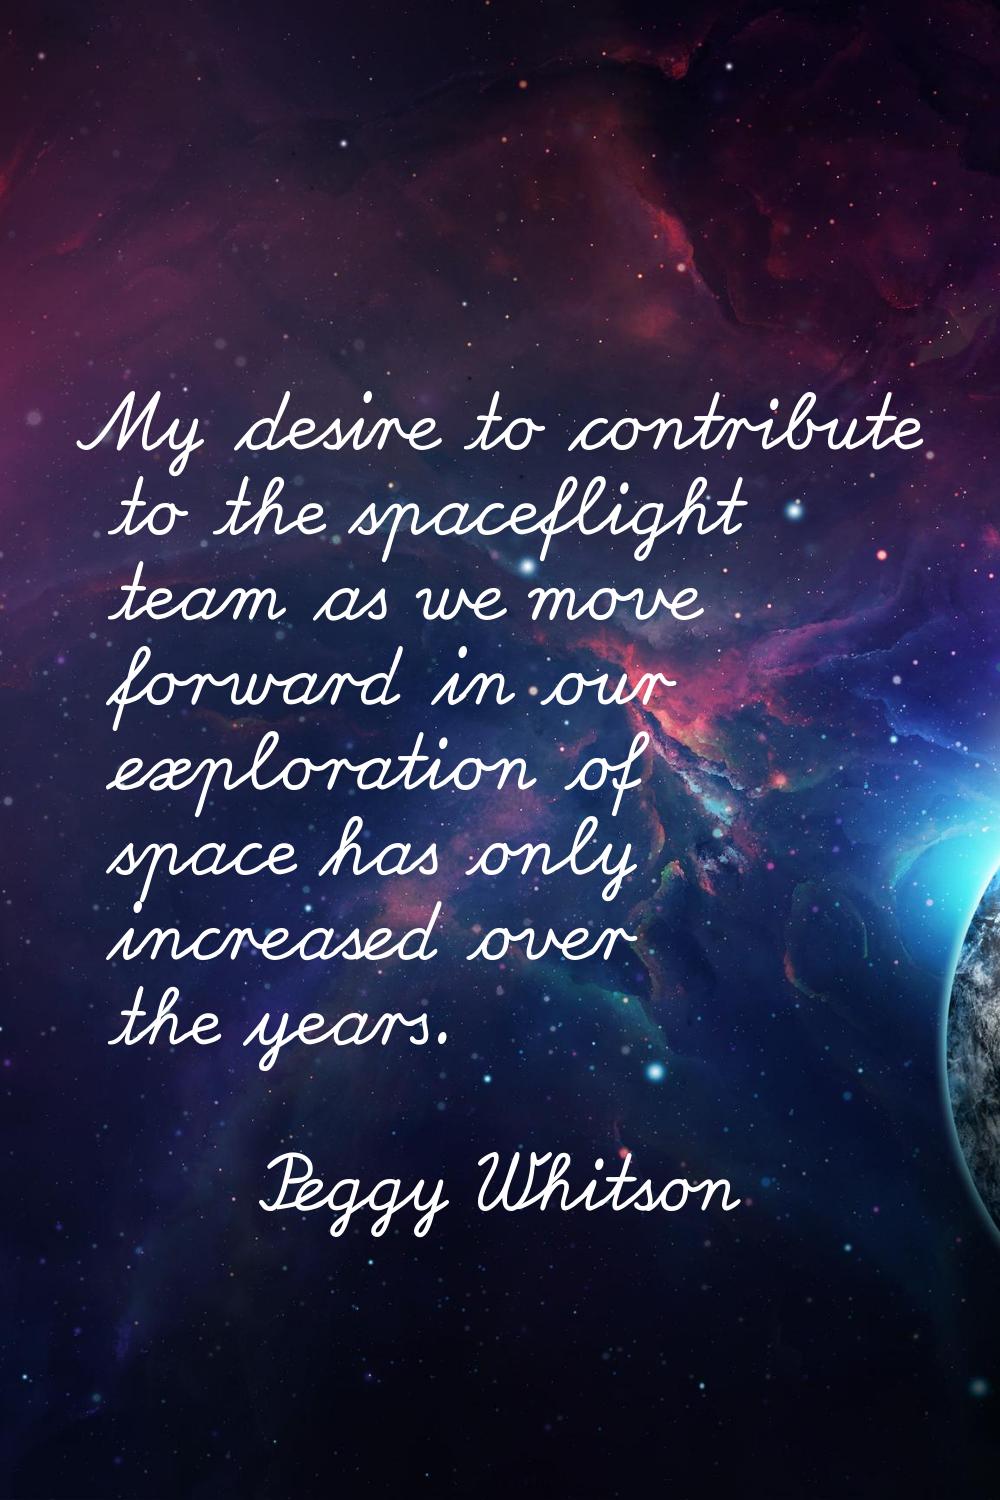 My desire to contribute to the spaceflight team as we move forward in our exploration of space has 